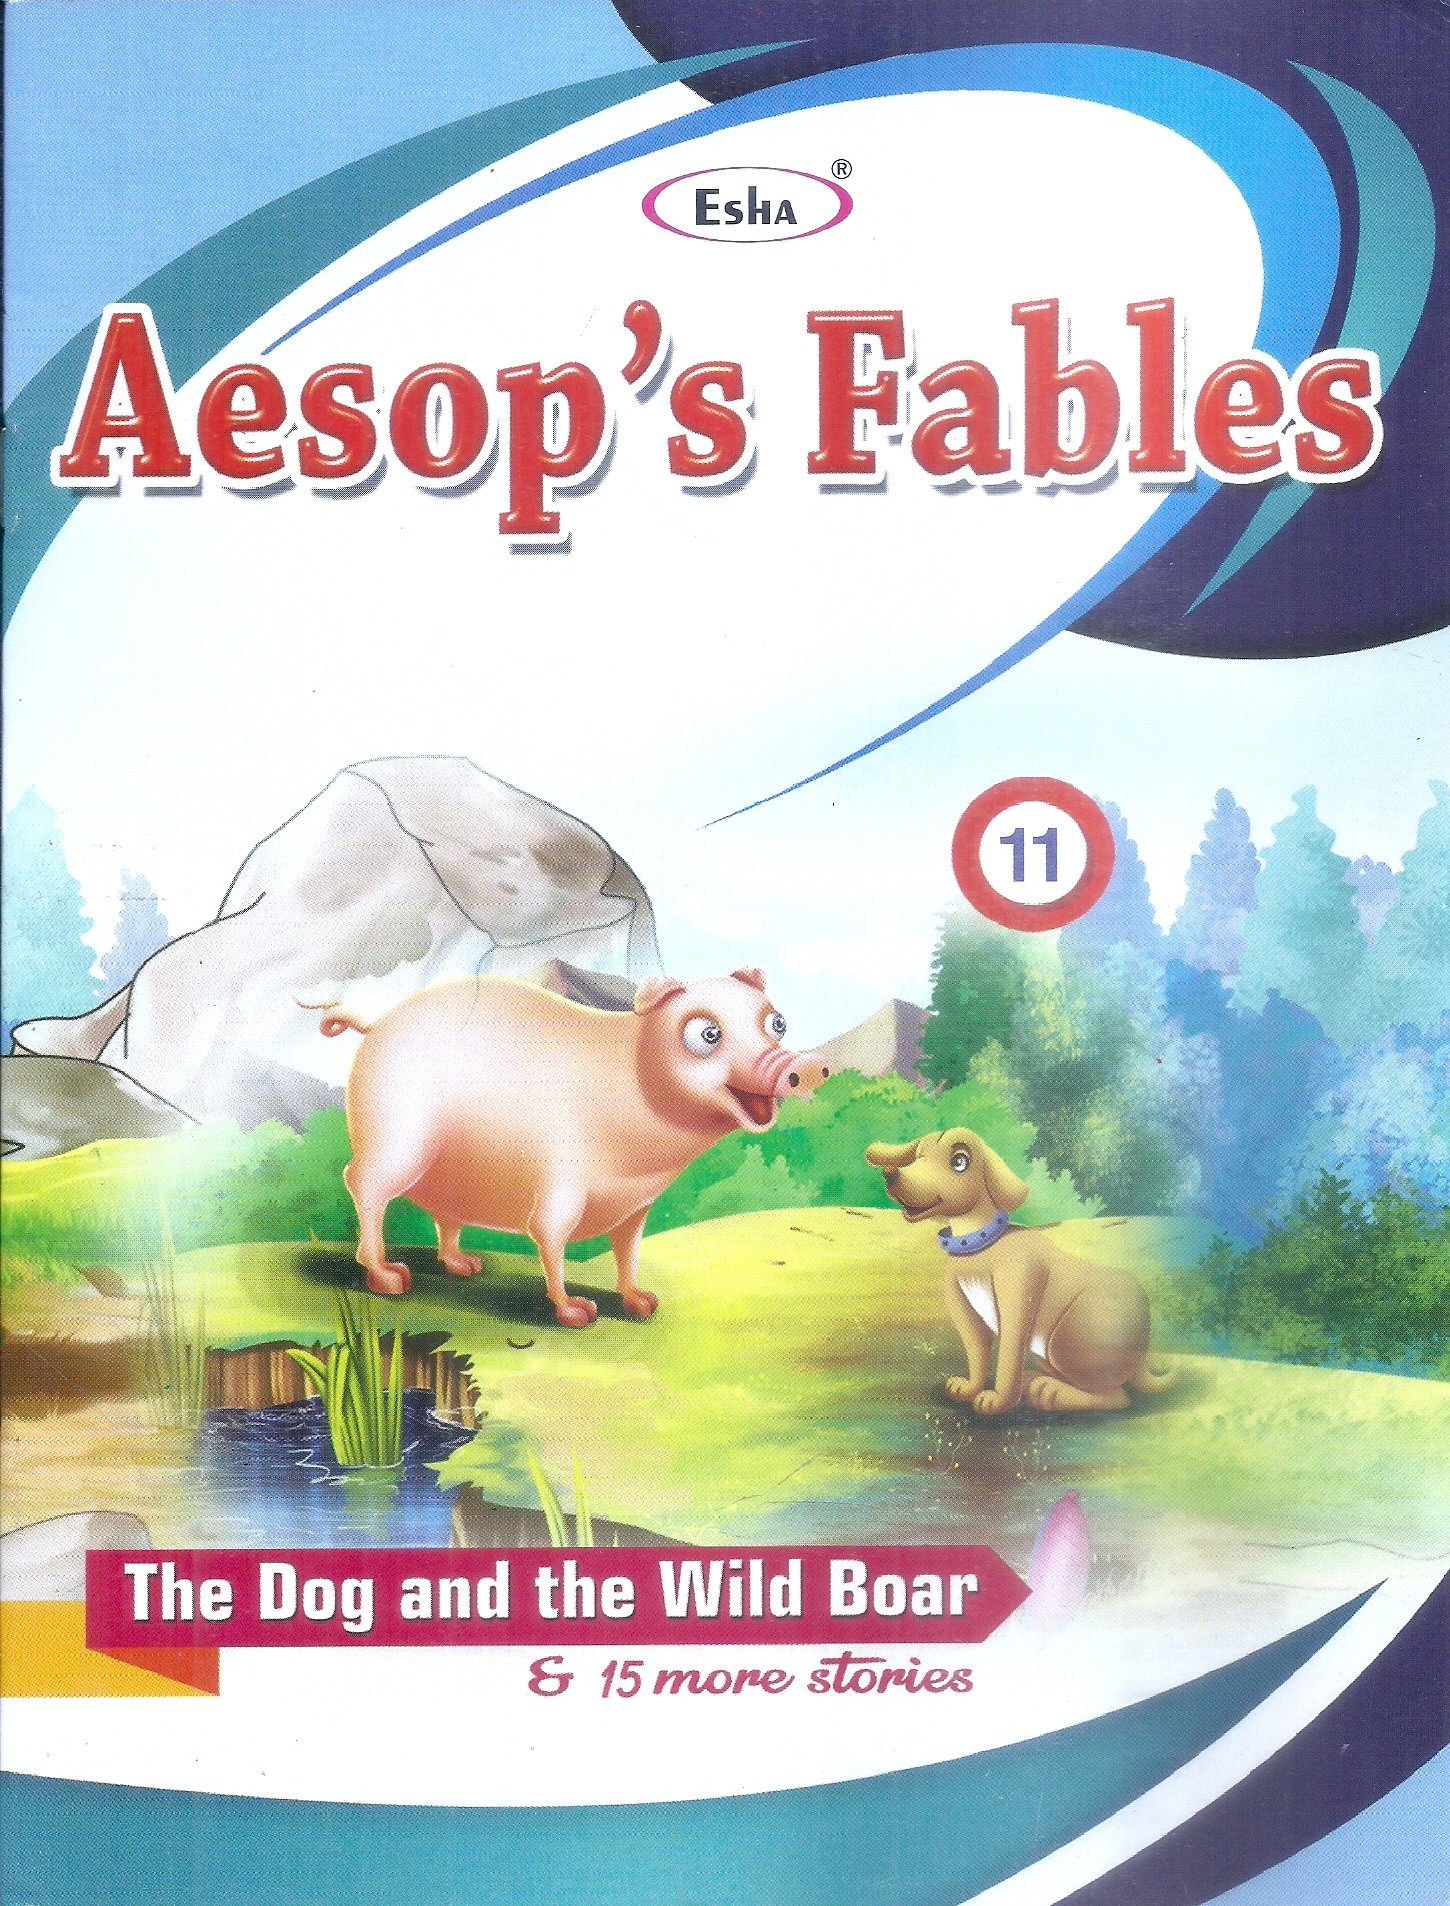 Aesop" s Fables The dog and the Wild Boar